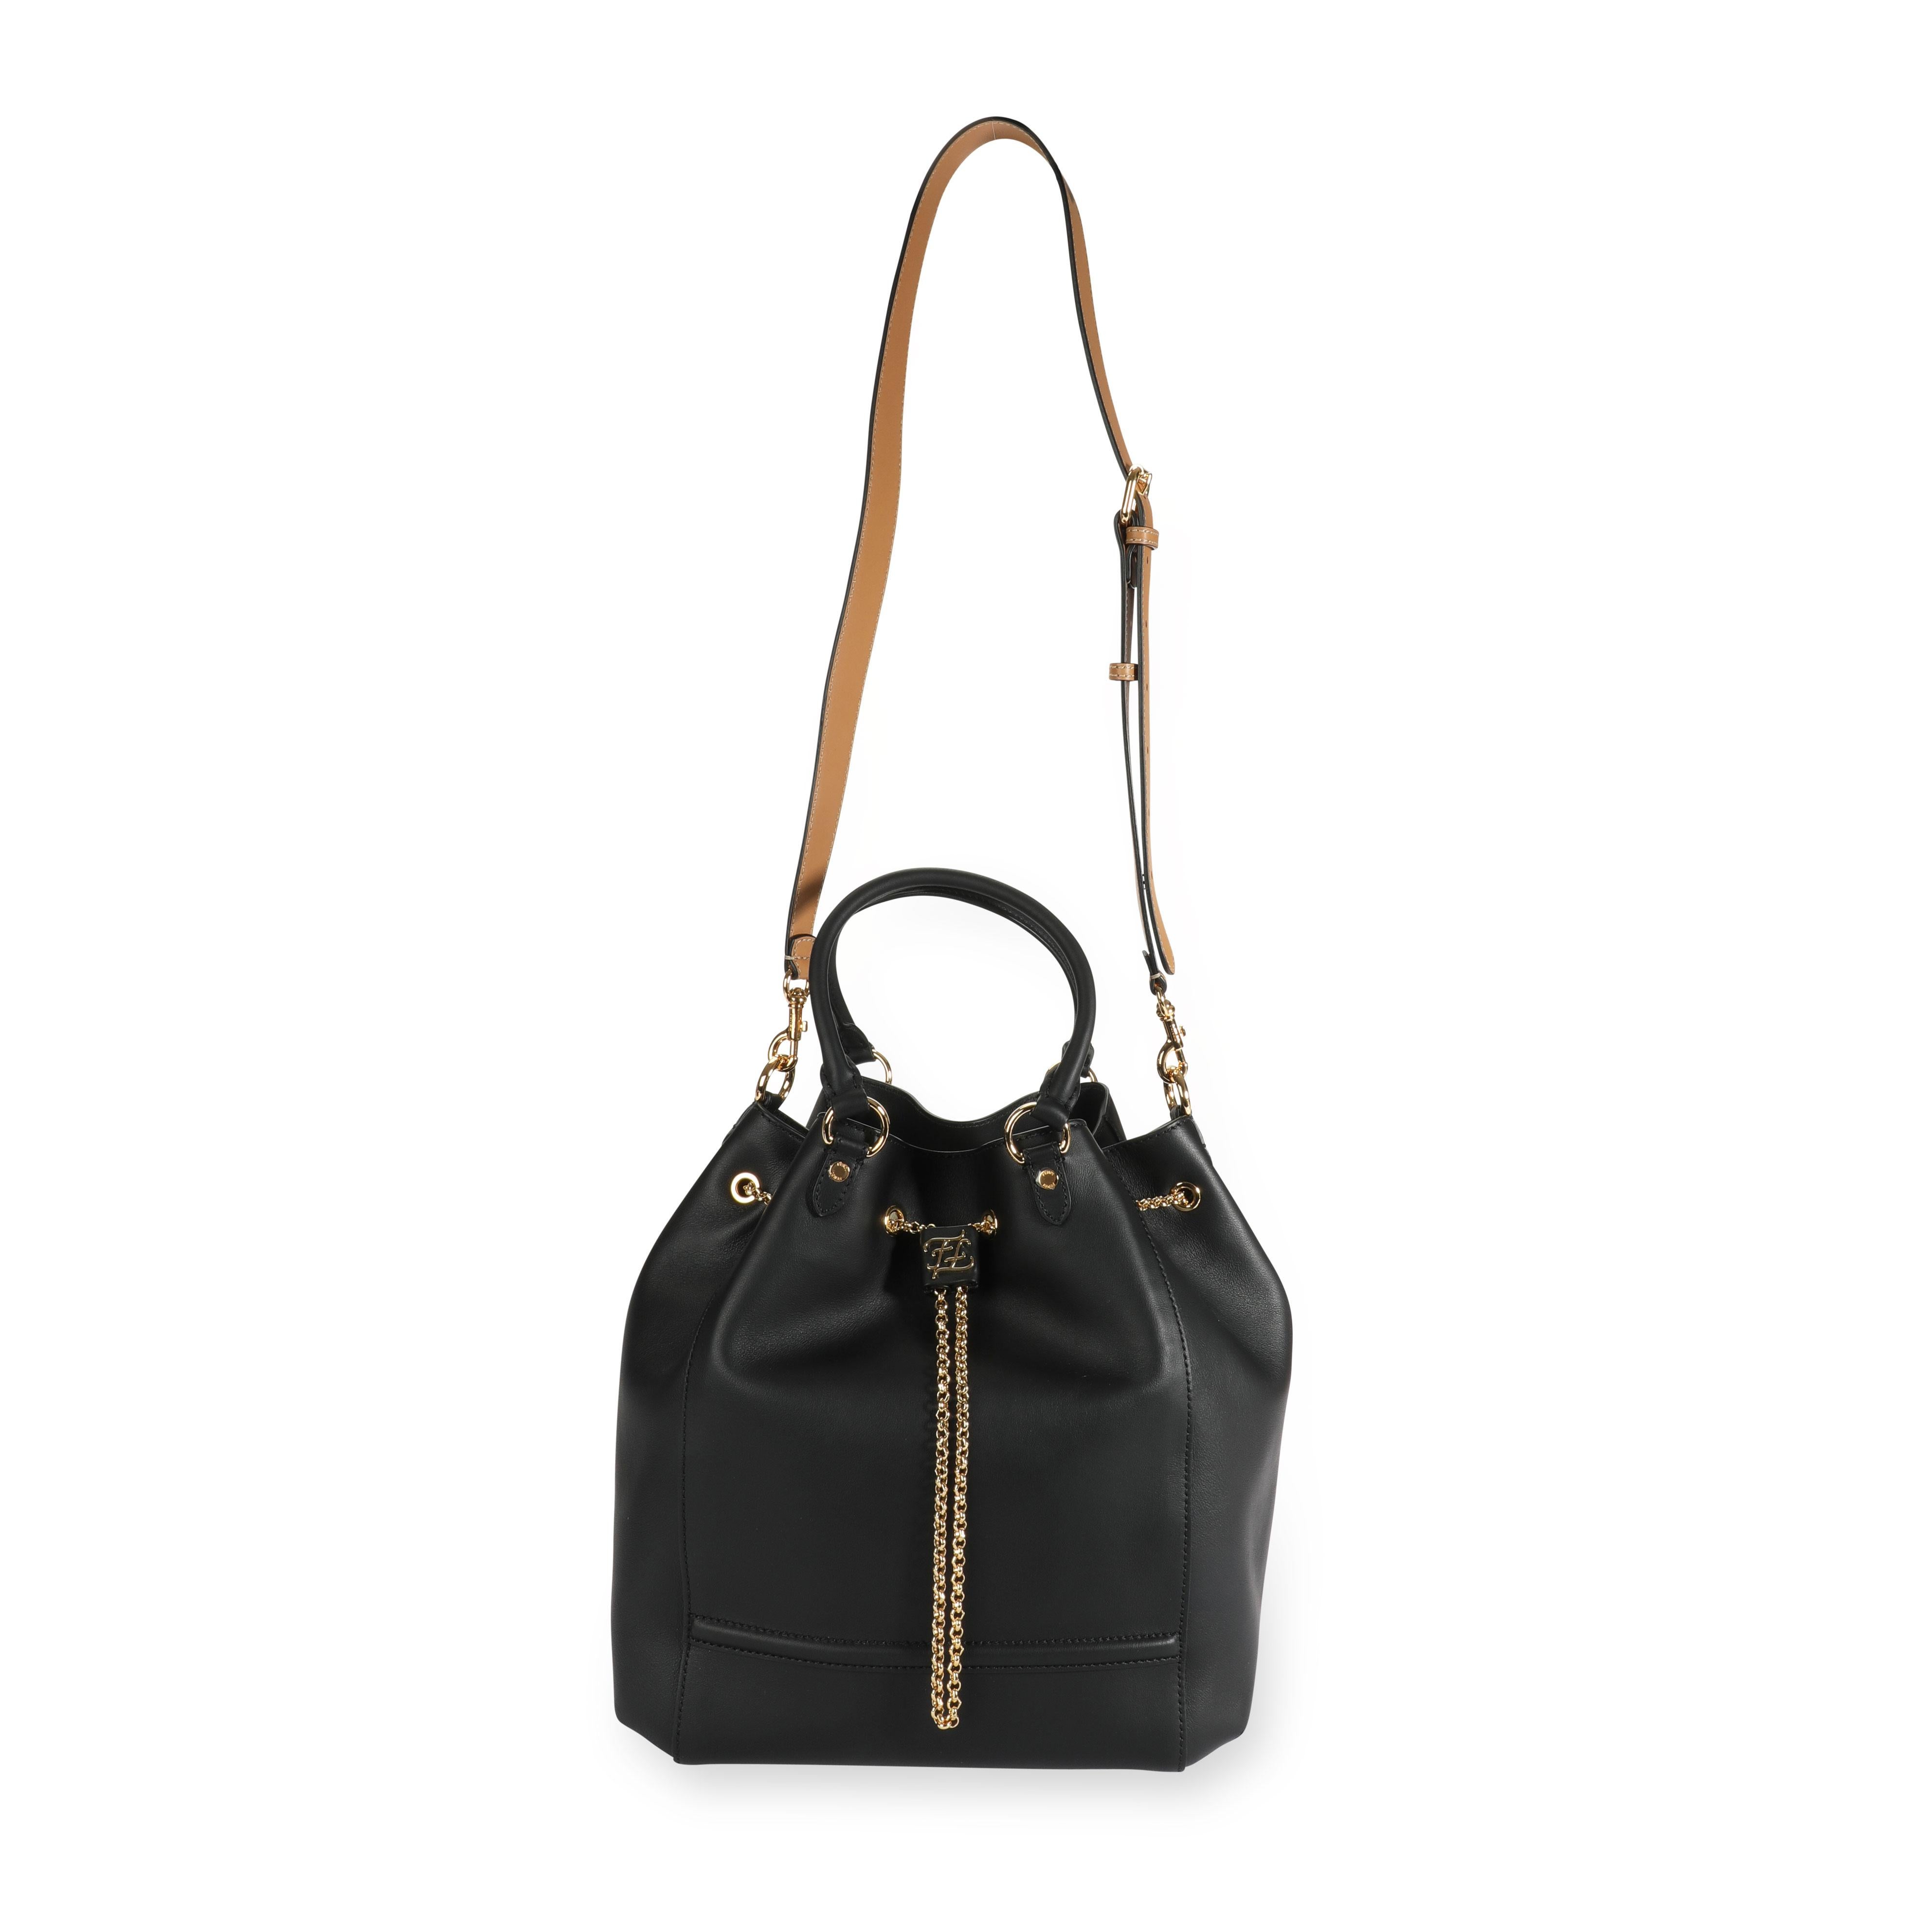 Fendi Black Vitello Leather Karligraphy Chain Bucket Bag
SKU: 109671
MSRP: 3190.00
Condition: Pre-owned (3000)
Handbag Condition: Excellent
Condition Comments: Excellent Condition. Plastic on feet. No visible signs of wear. Final sale.
Brand: